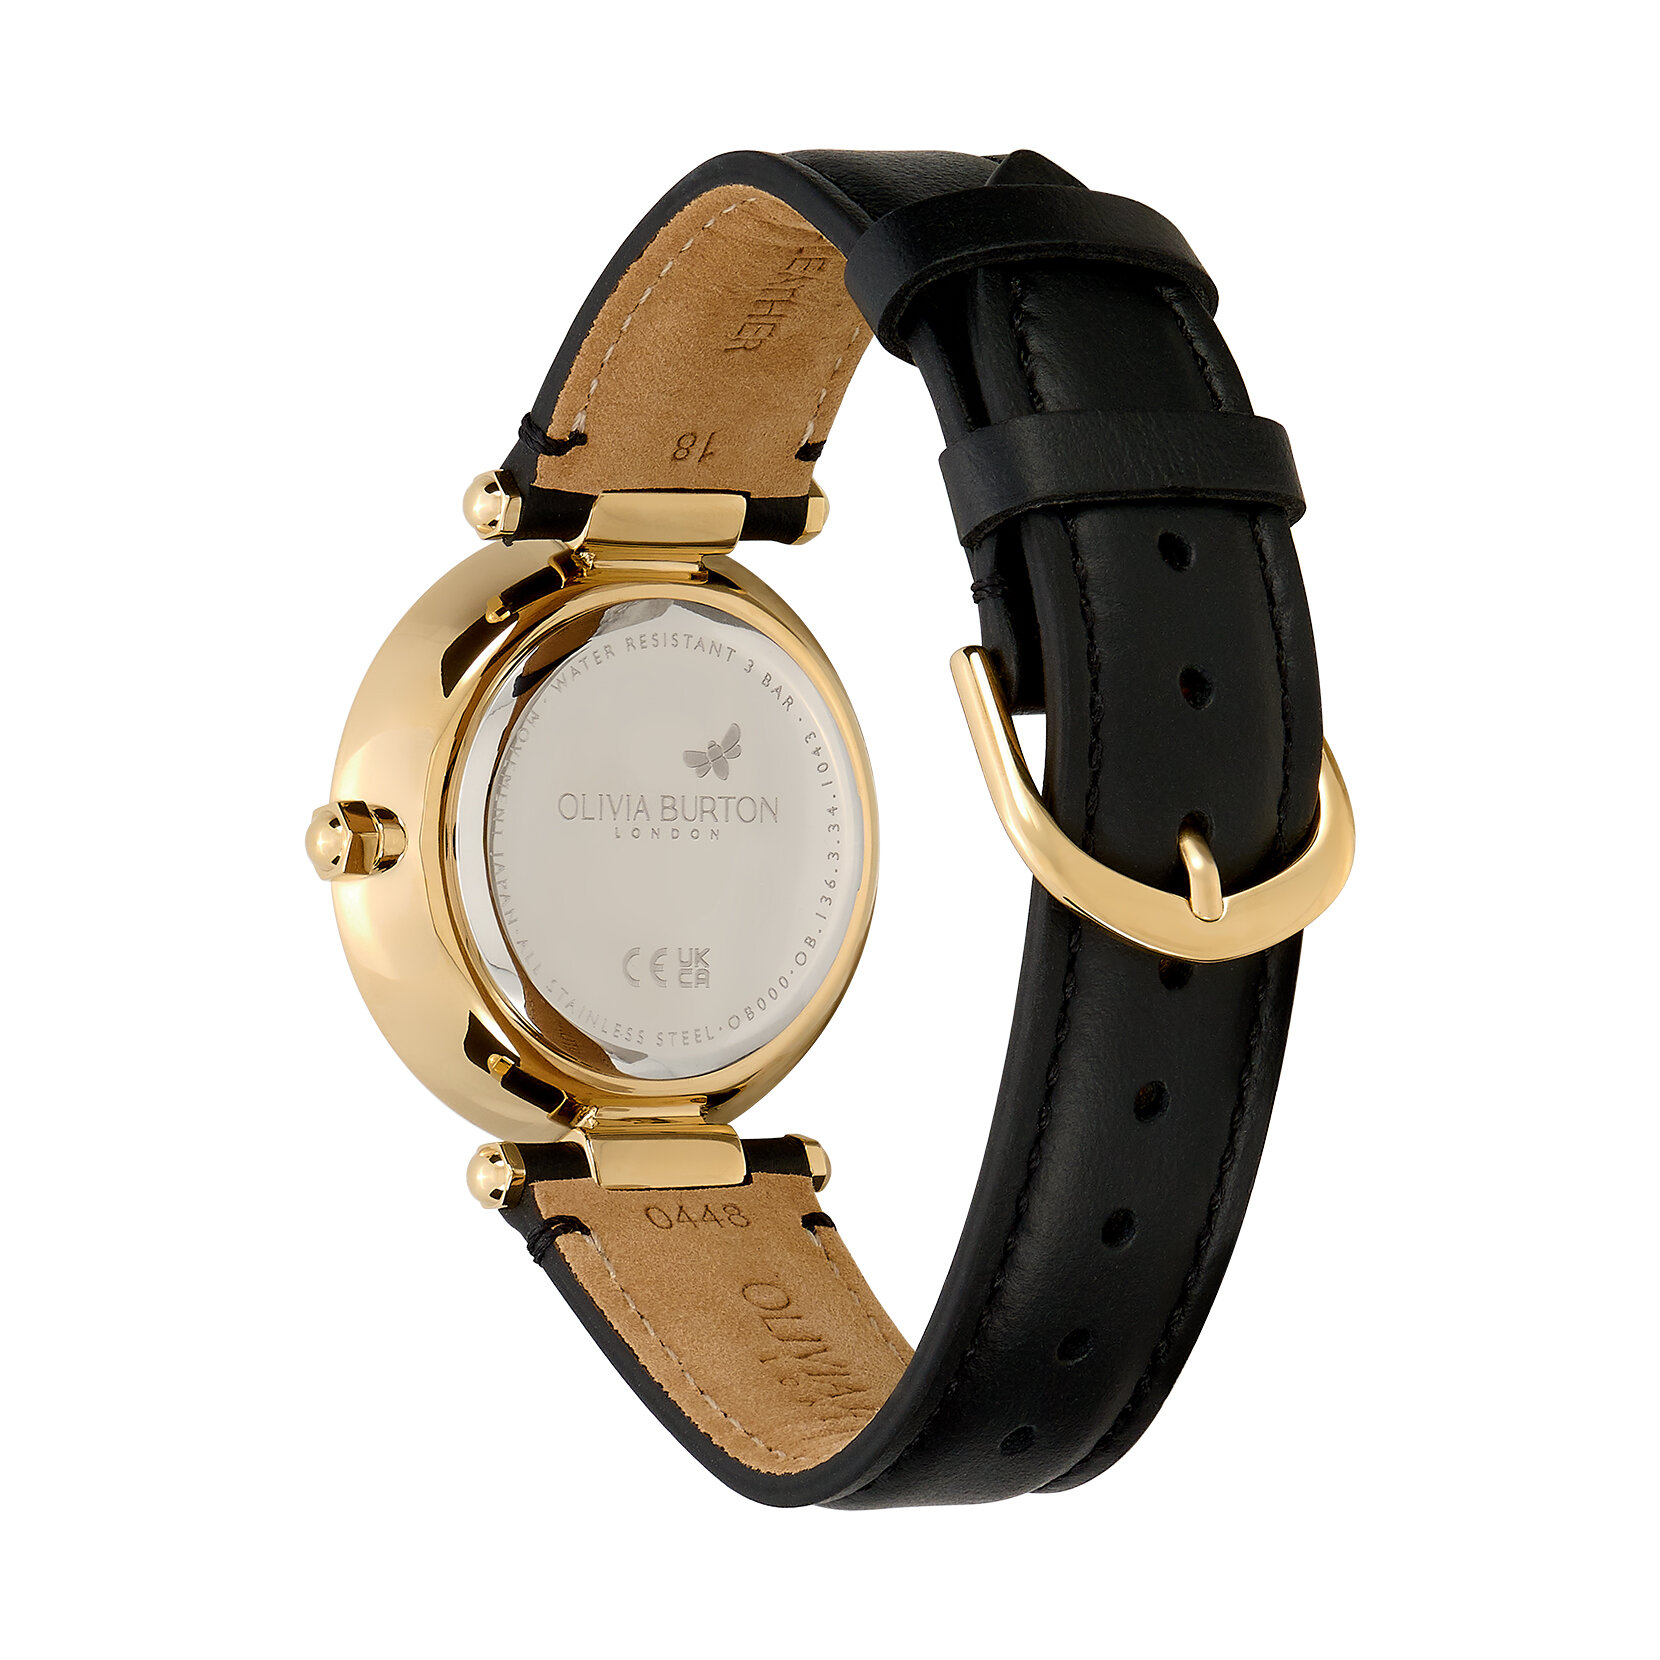 34mm Floral T-Bar Gold & Black Leather Strap Watch